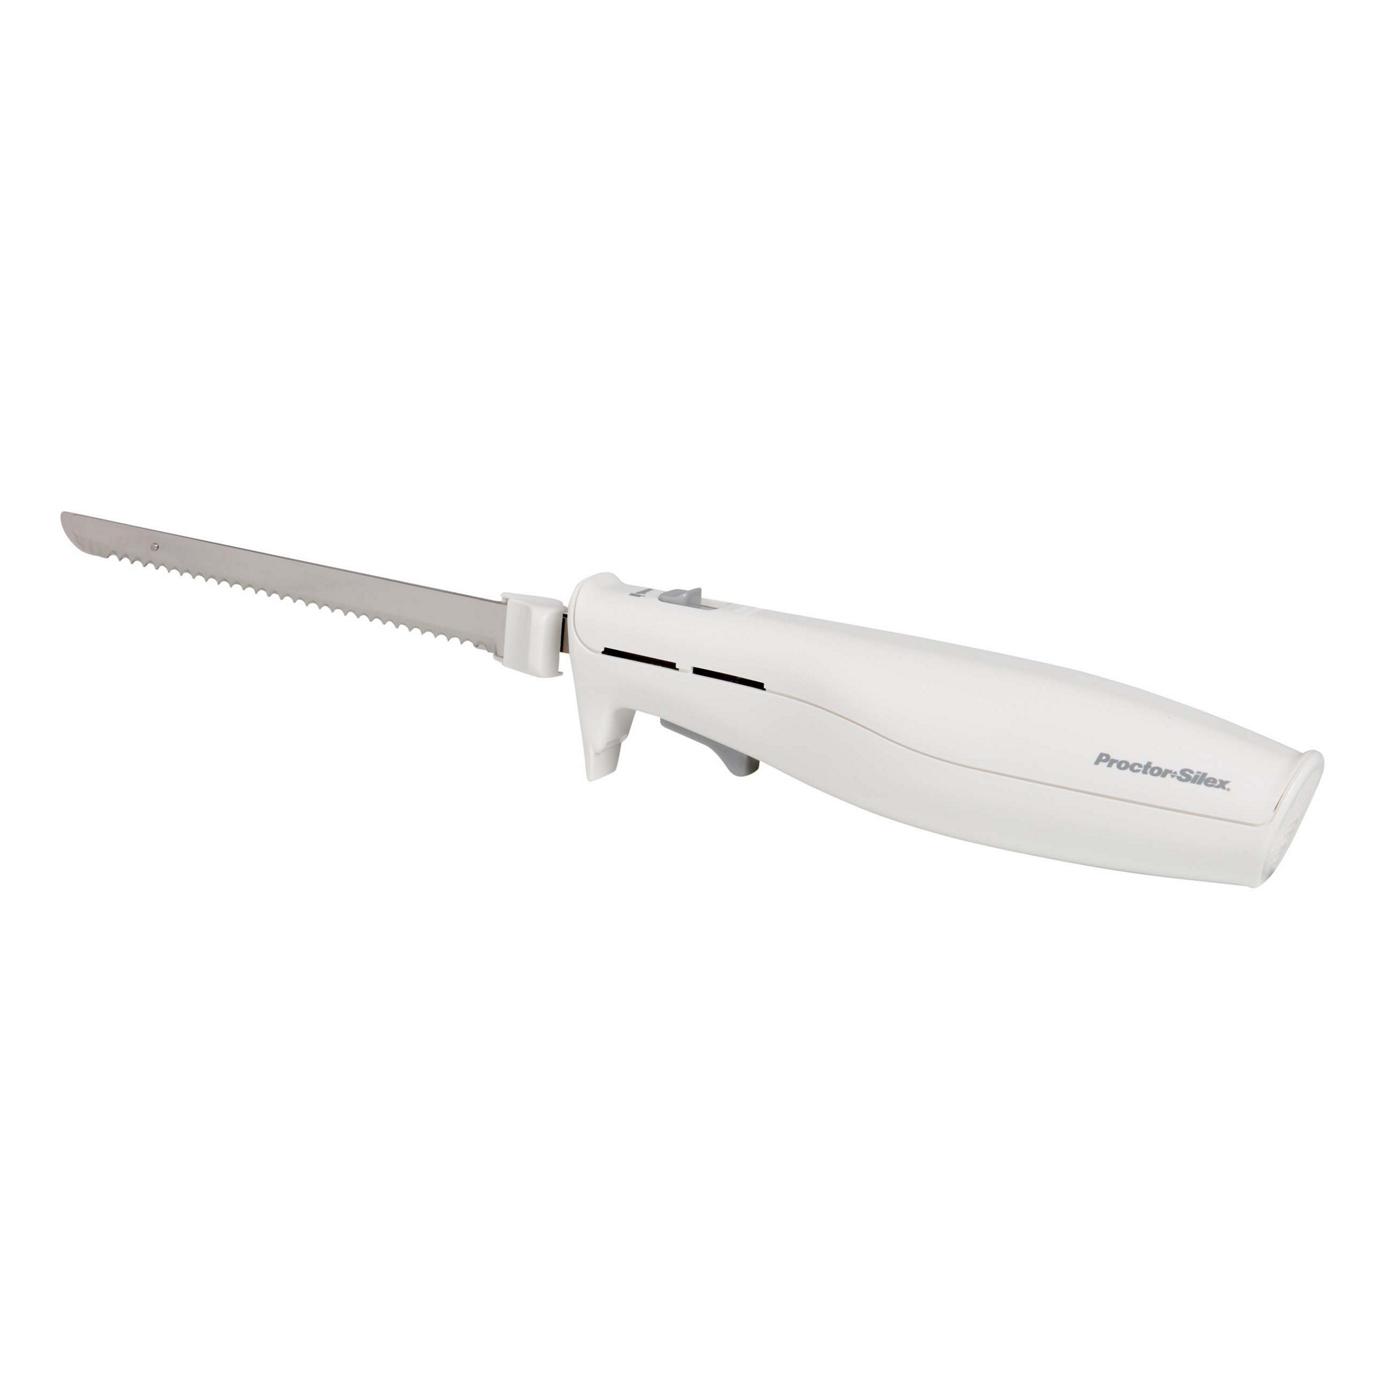 Proctor Silex Serrated Blade Electric Knife - White - Shop Knives at H-E-B